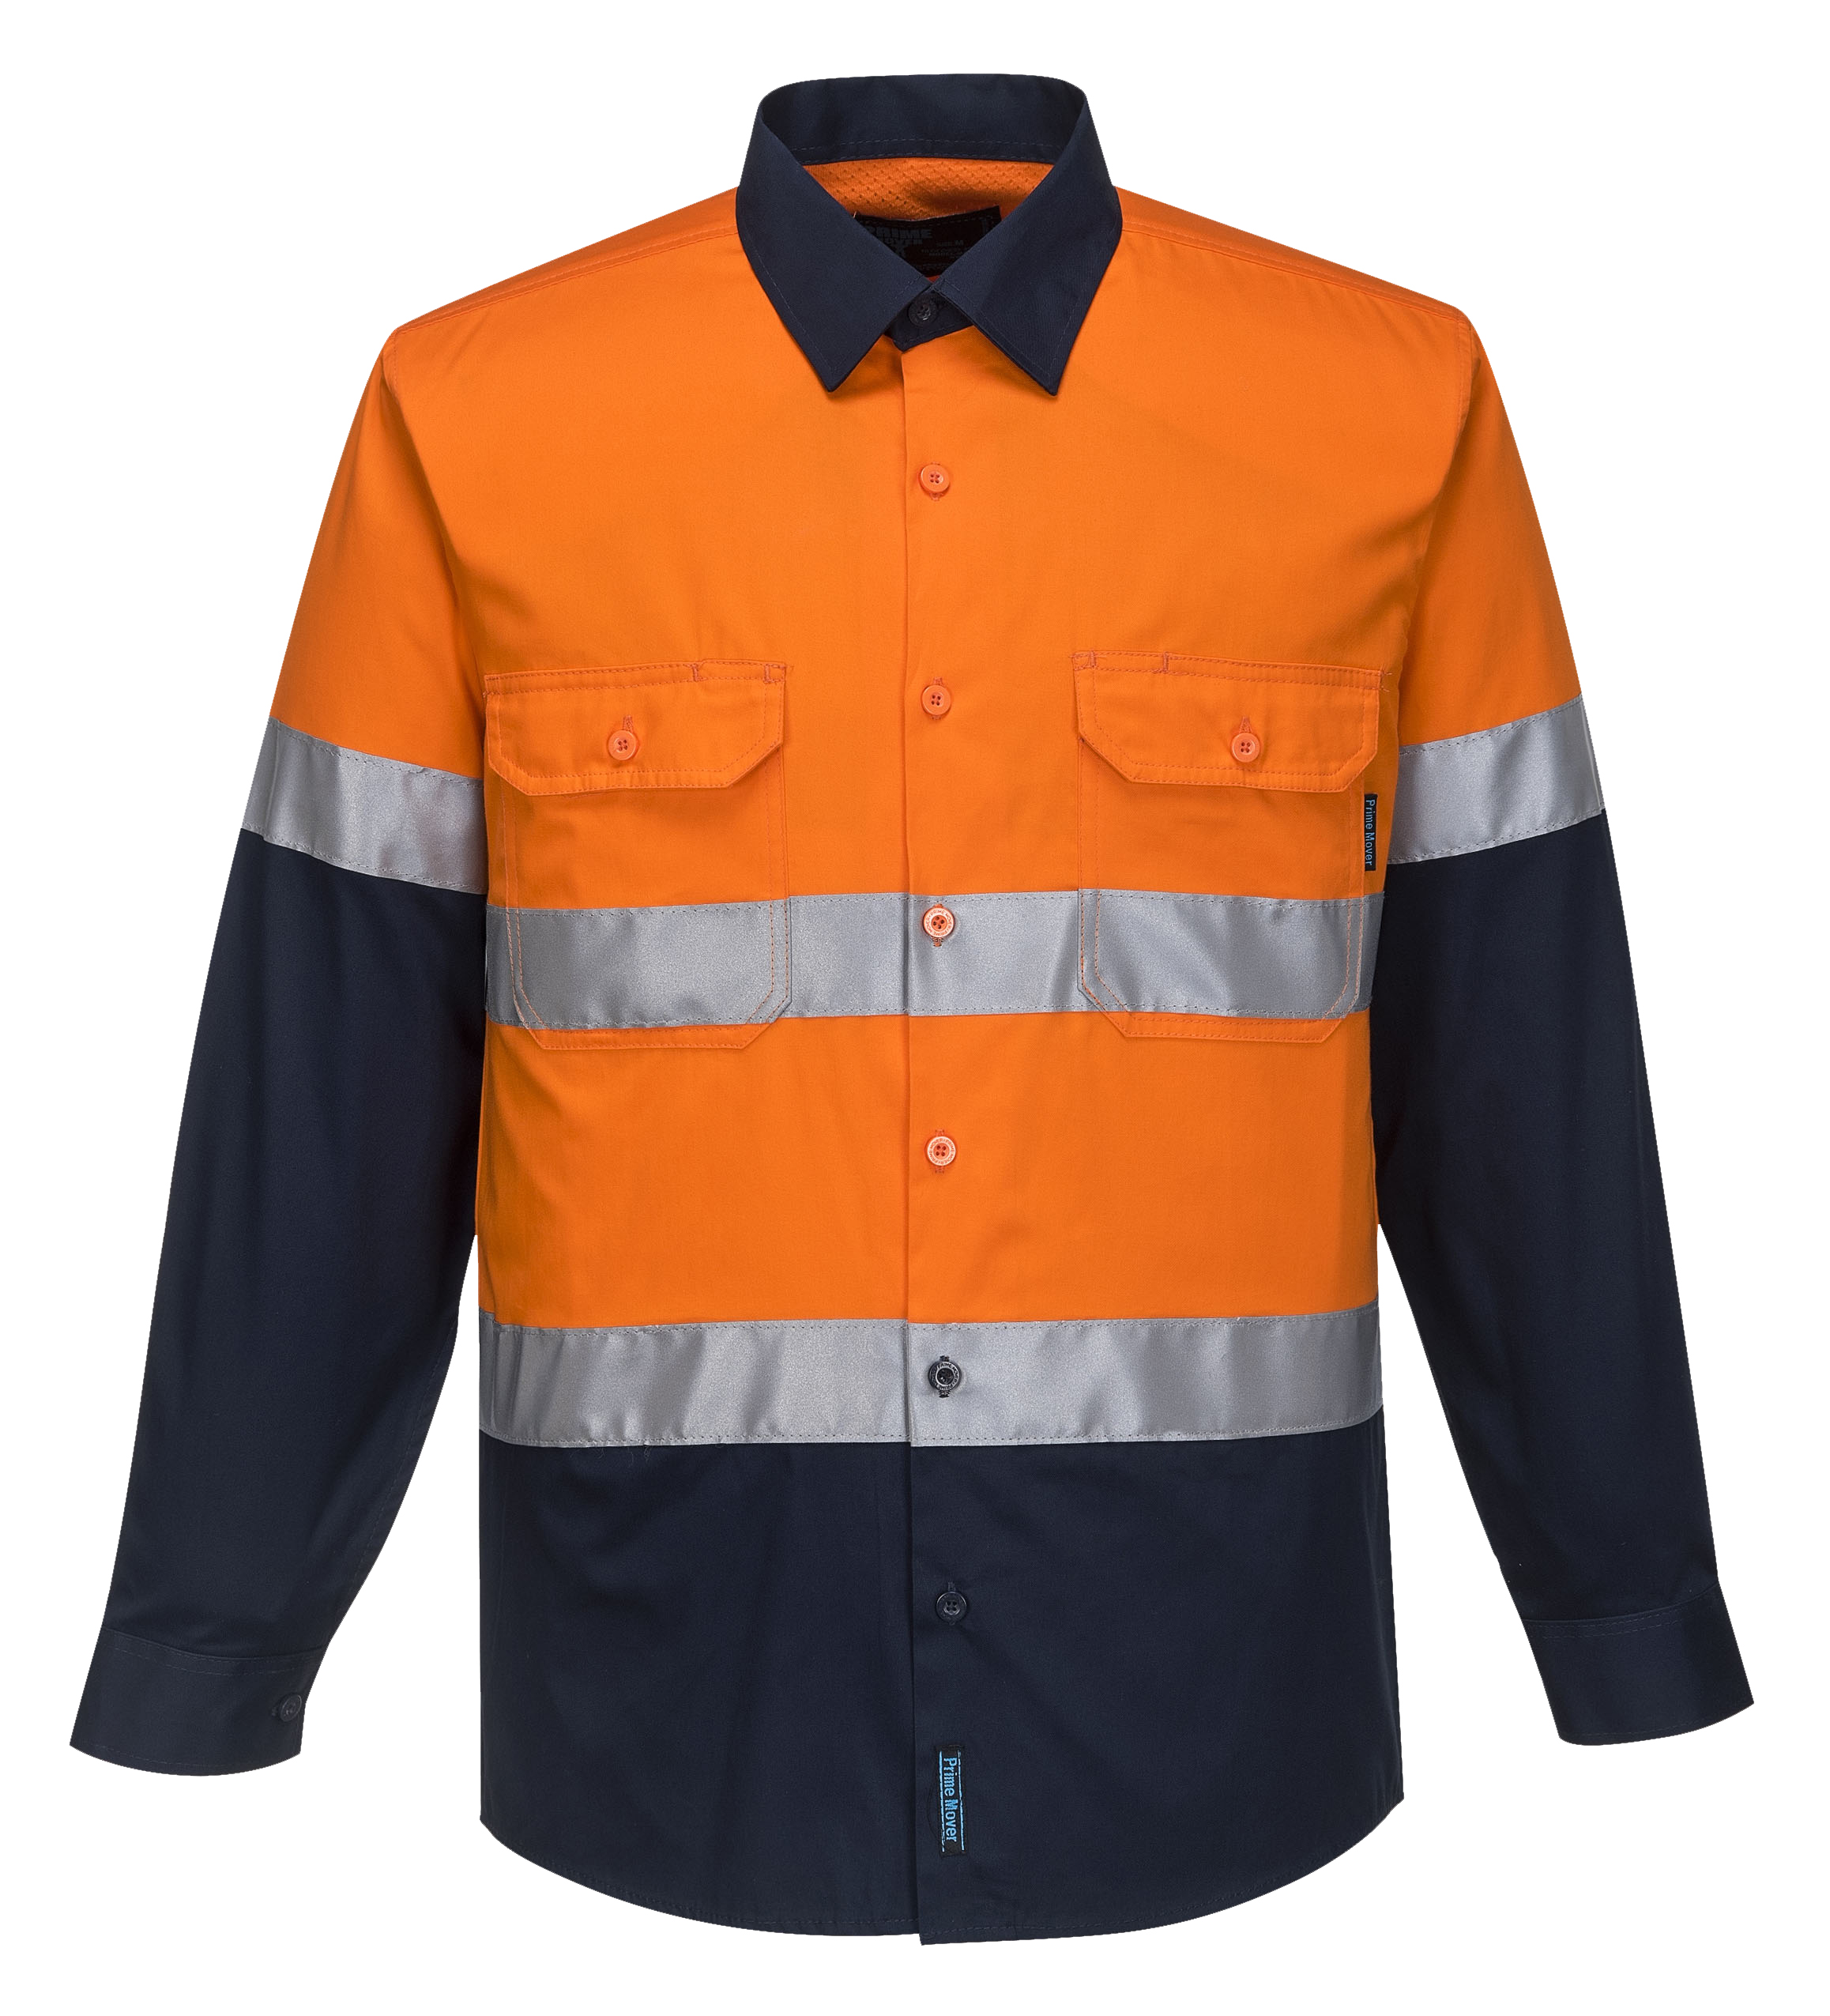 MA801 - Hi-Vis Two Tone Cotton Lightweight Long Sleeve Shirt with Tape ORG1